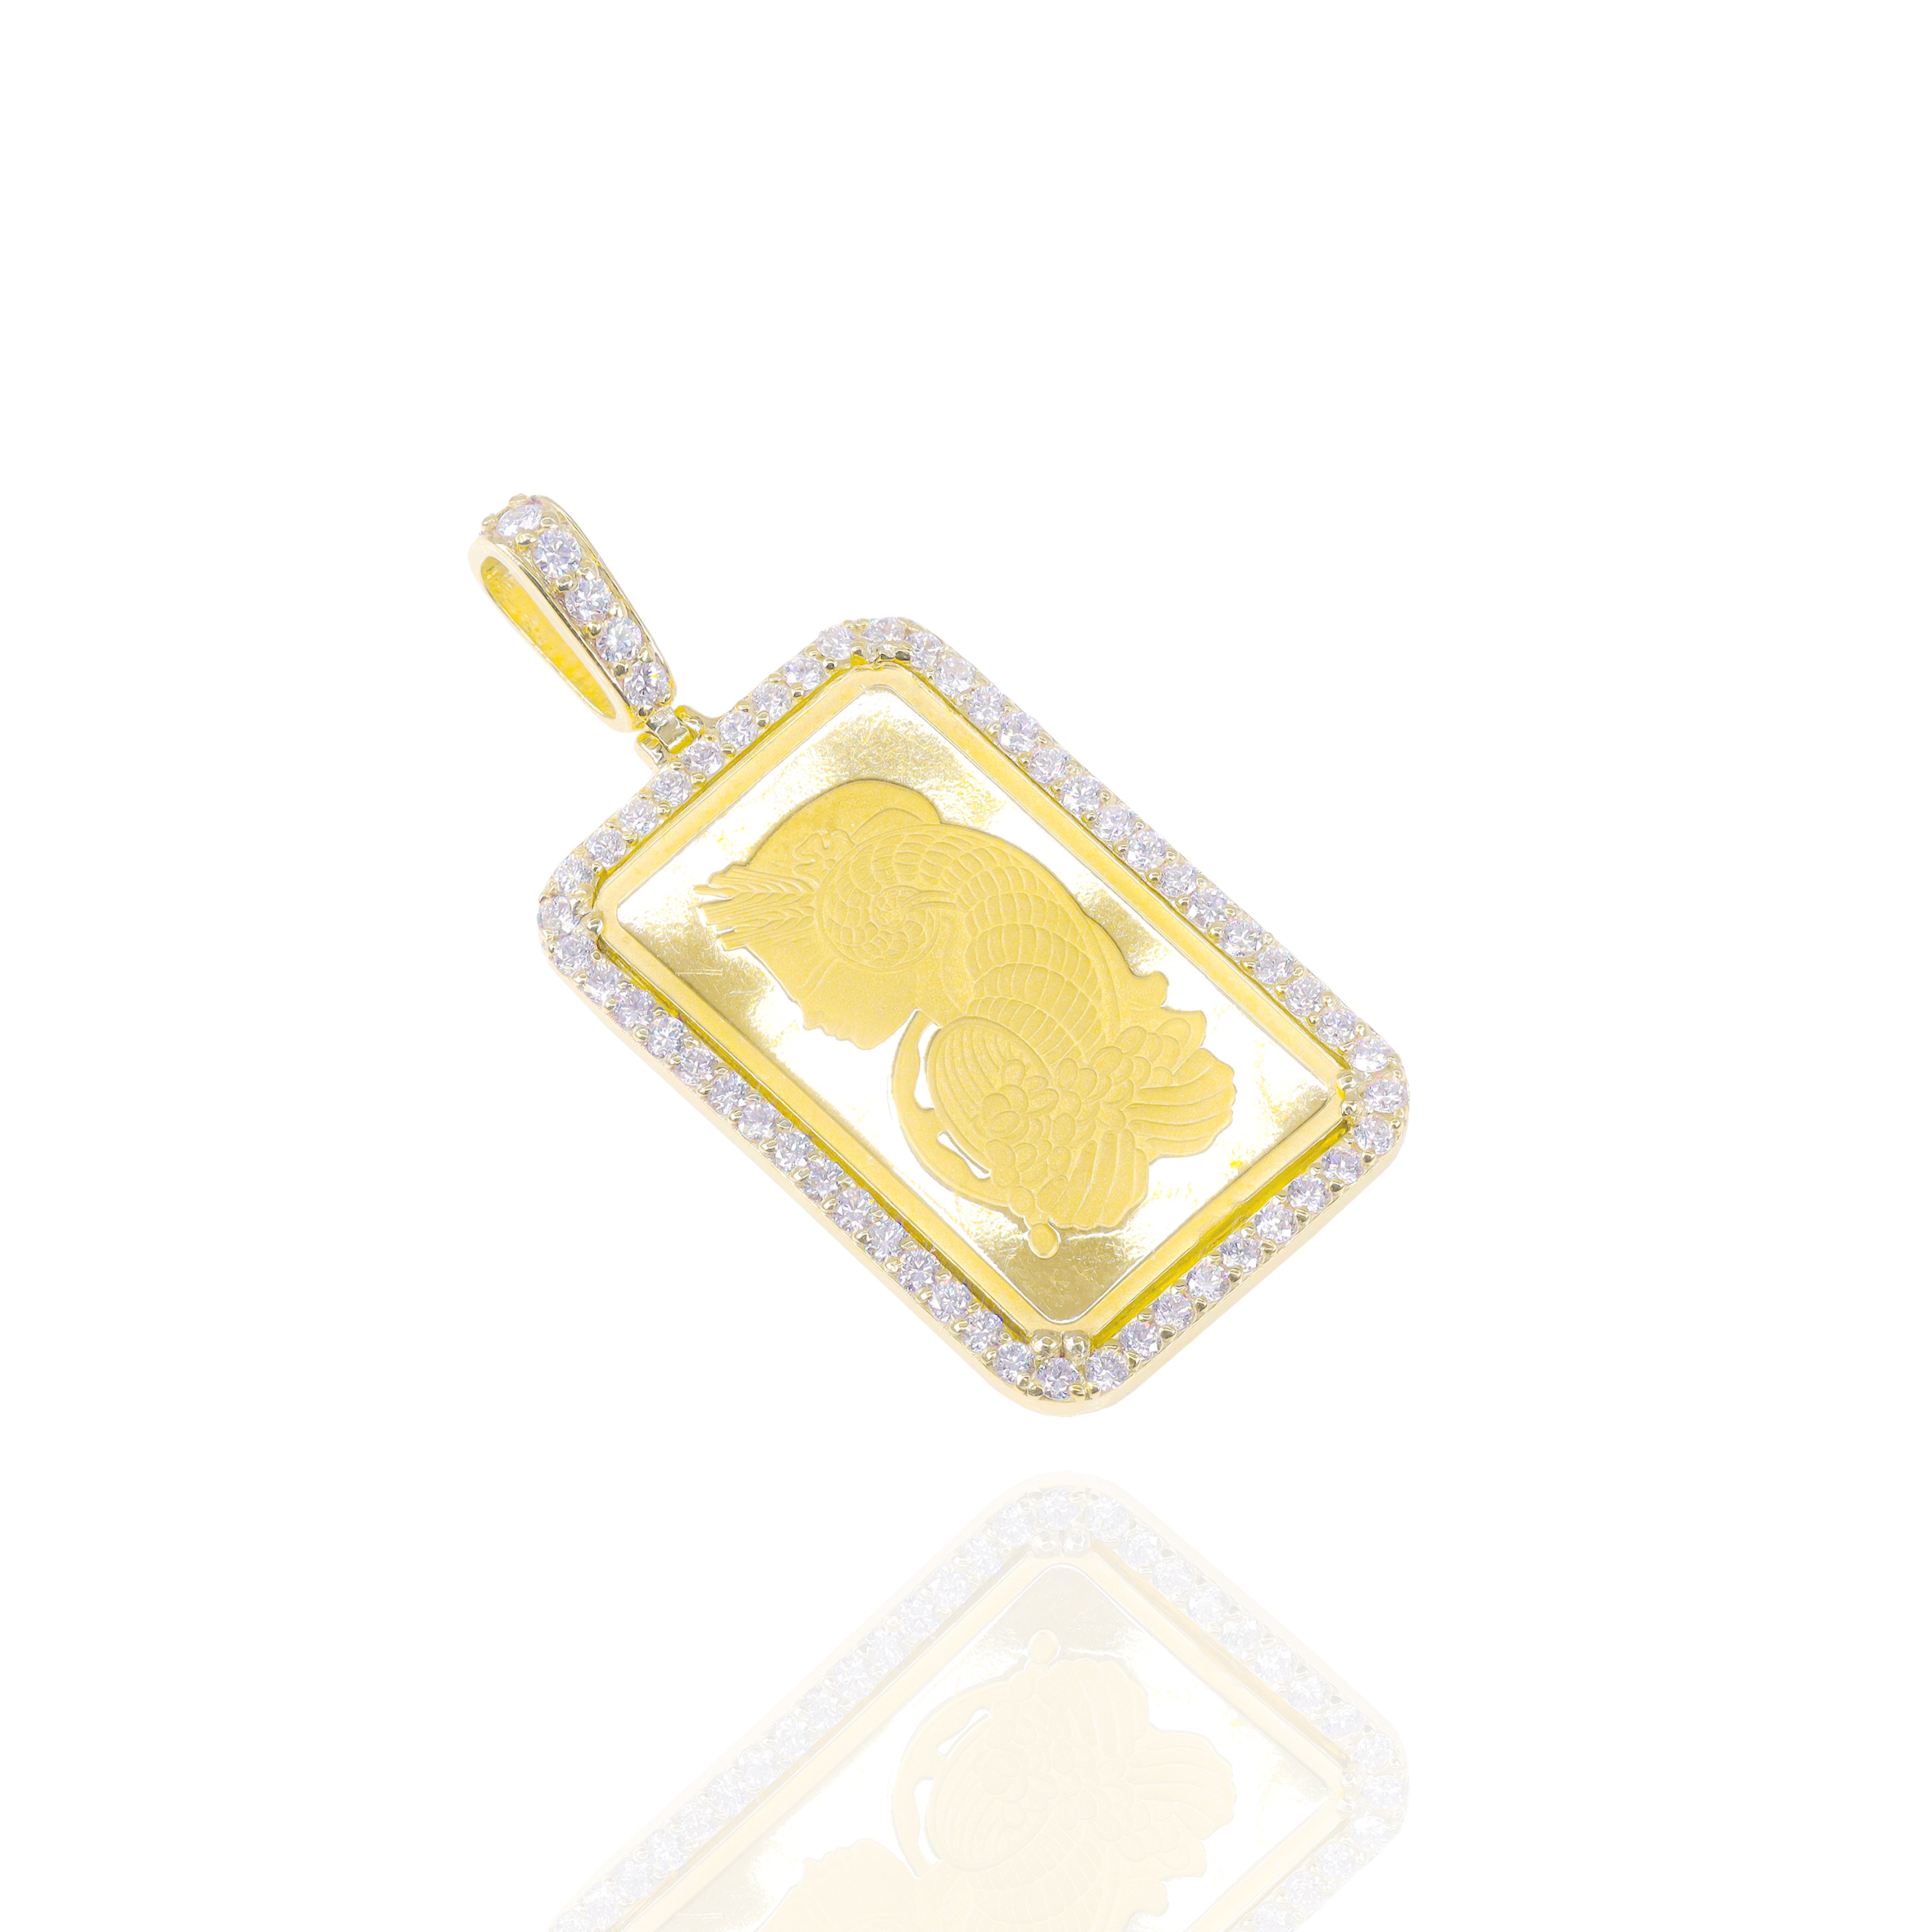 5g Gold Coin with Diamond Bezel Gold Pendant